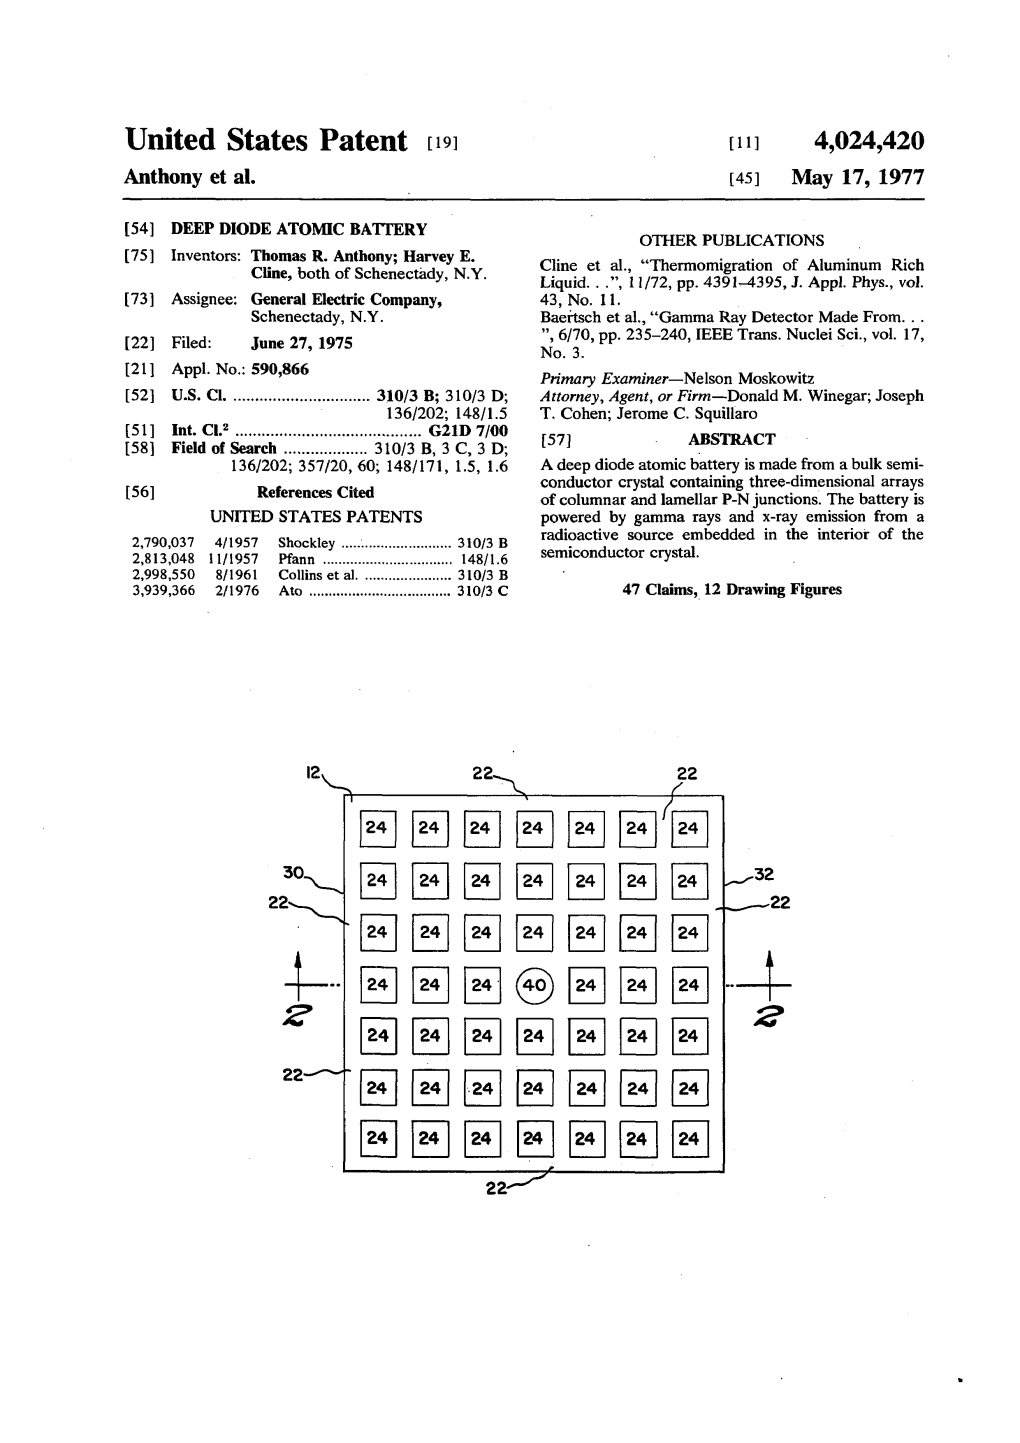 DEEP DIODE ATOMIC BATTERY OTHER PUBLICATIONS [75] Inventors: Thomas R